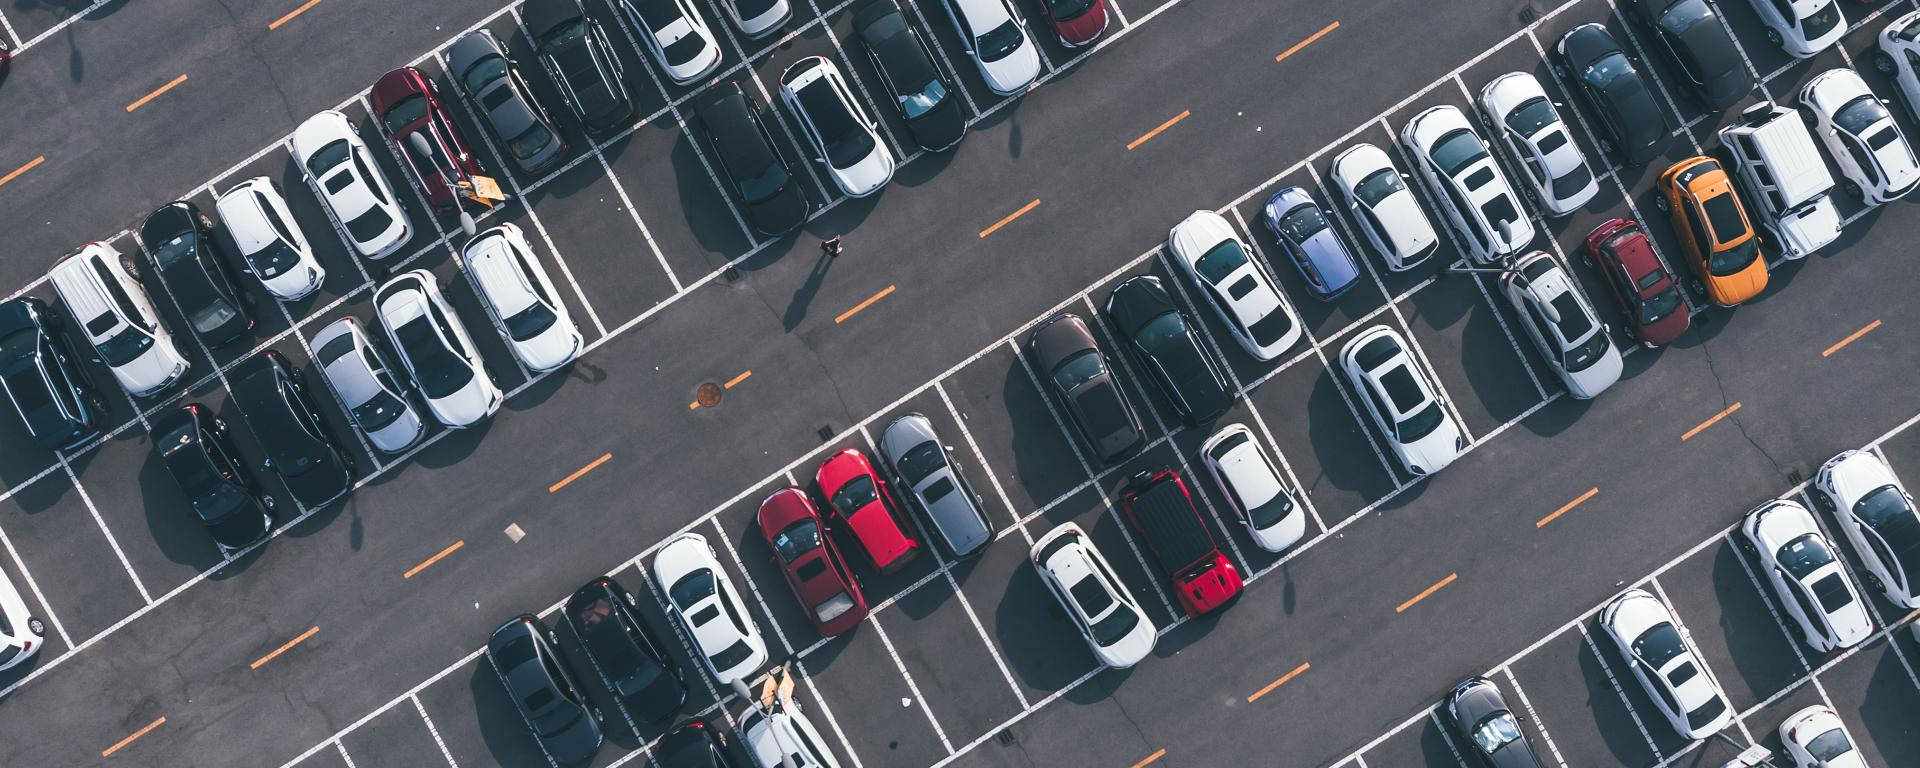 "Aerial View of a Bustling Parking Lot" Wallpaper